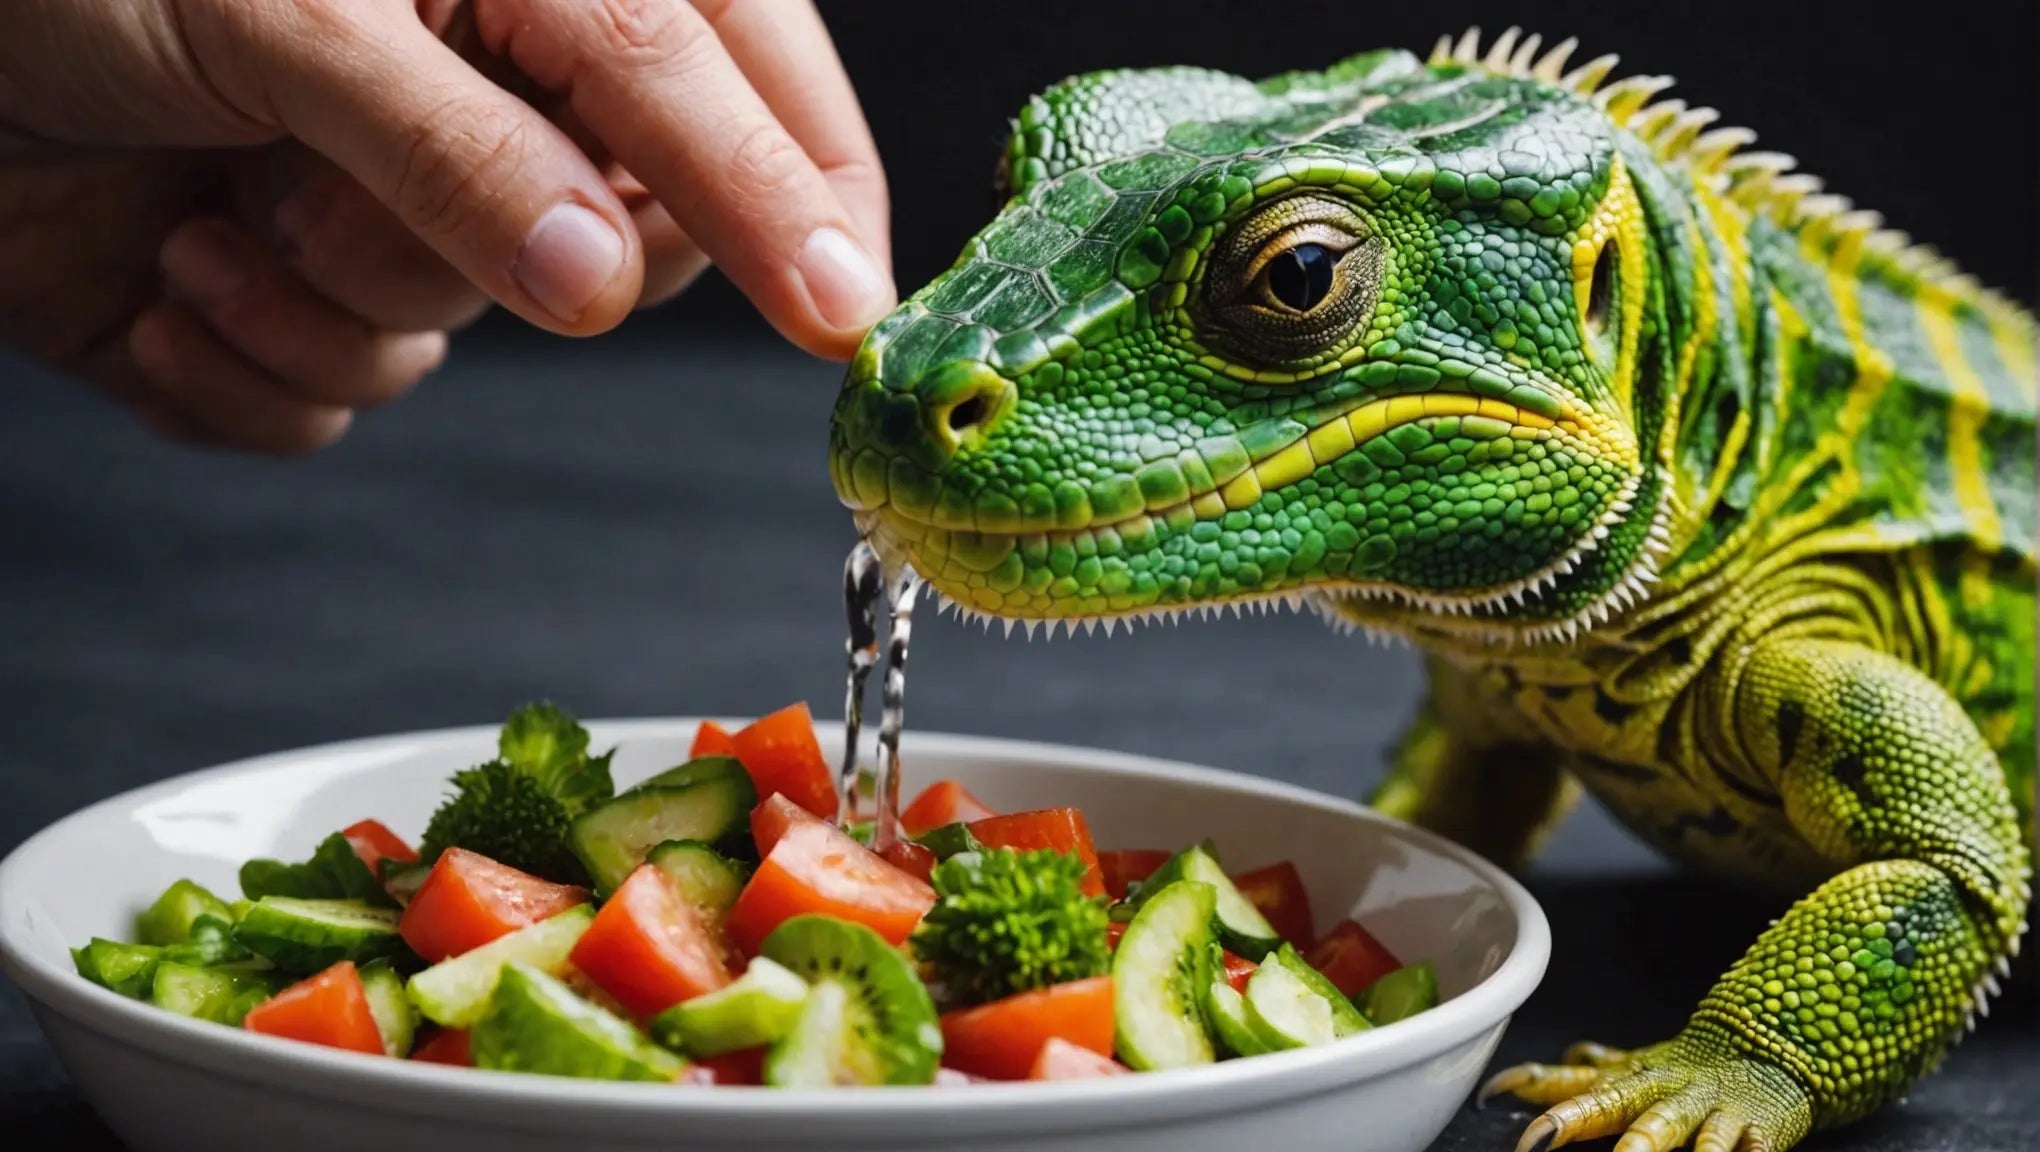 Discover the Nutritional Benefits of Gel Food for Reptiles